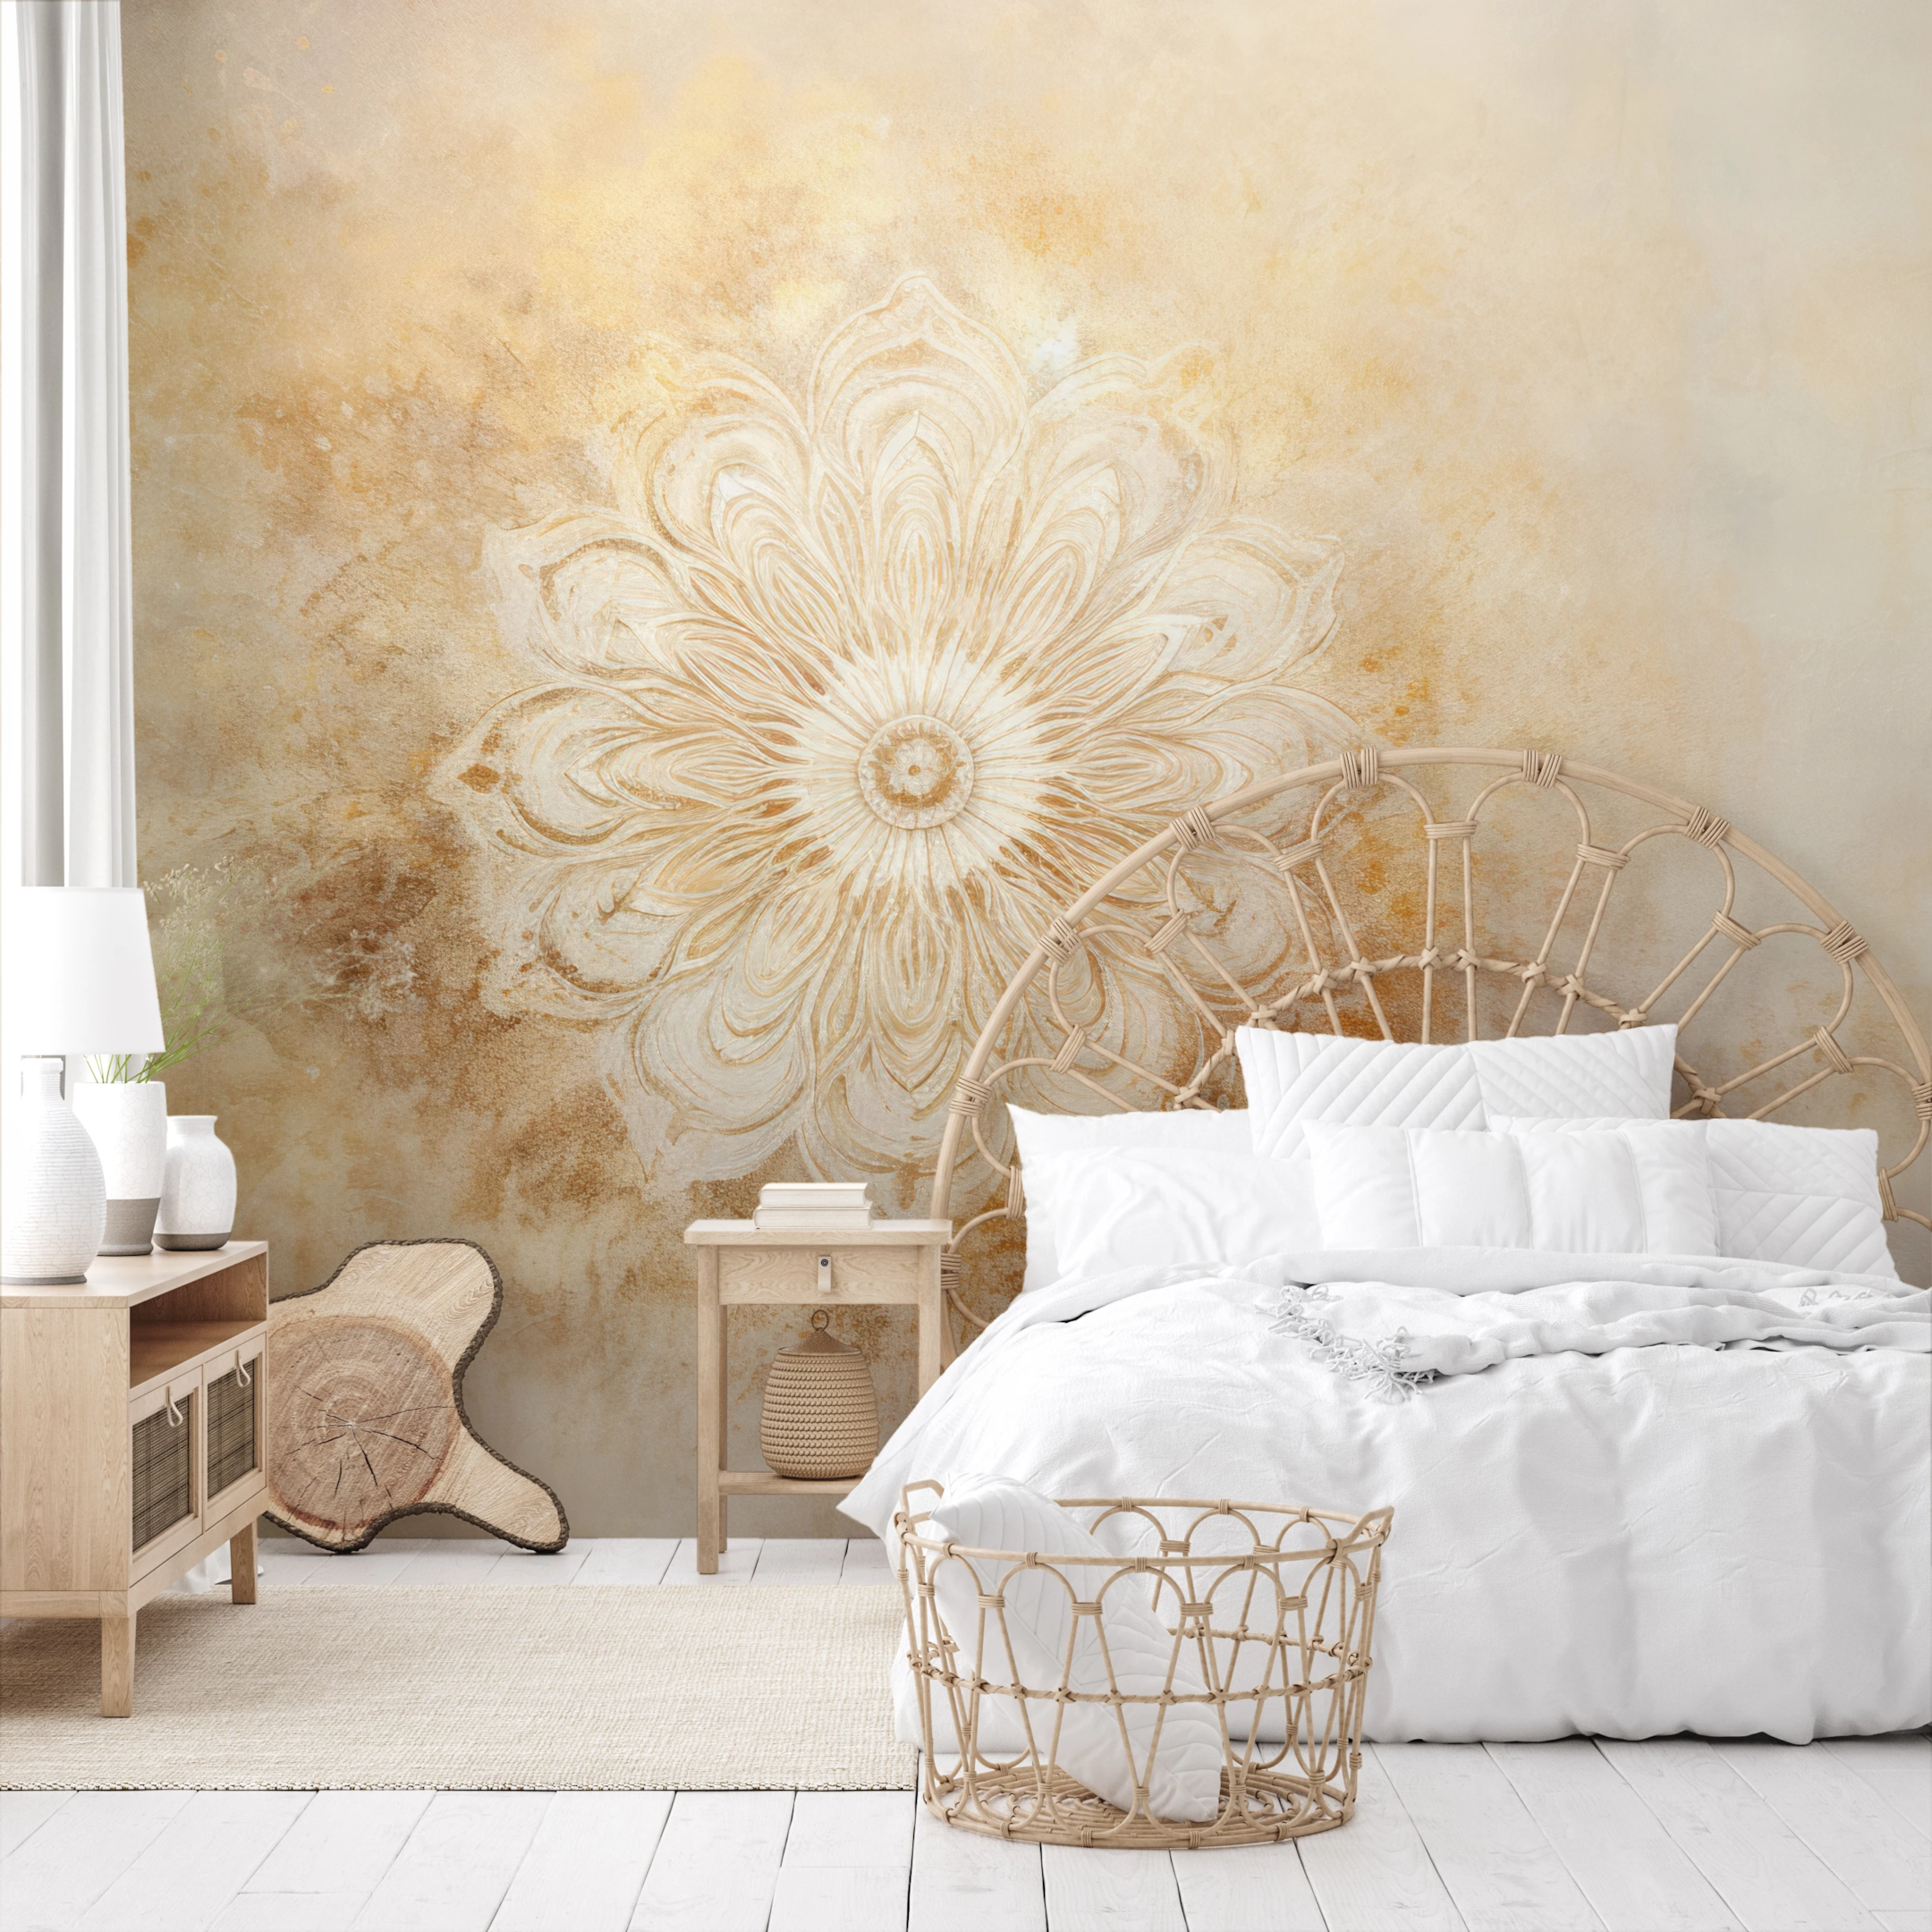 "Serene Flora" is a photo wallpaper in gentle beiges and whites with a delicate floral motif that adds subtlety and lightness to the interior. This design will perfectly complement the space, introducing elements of nature and purity into it.